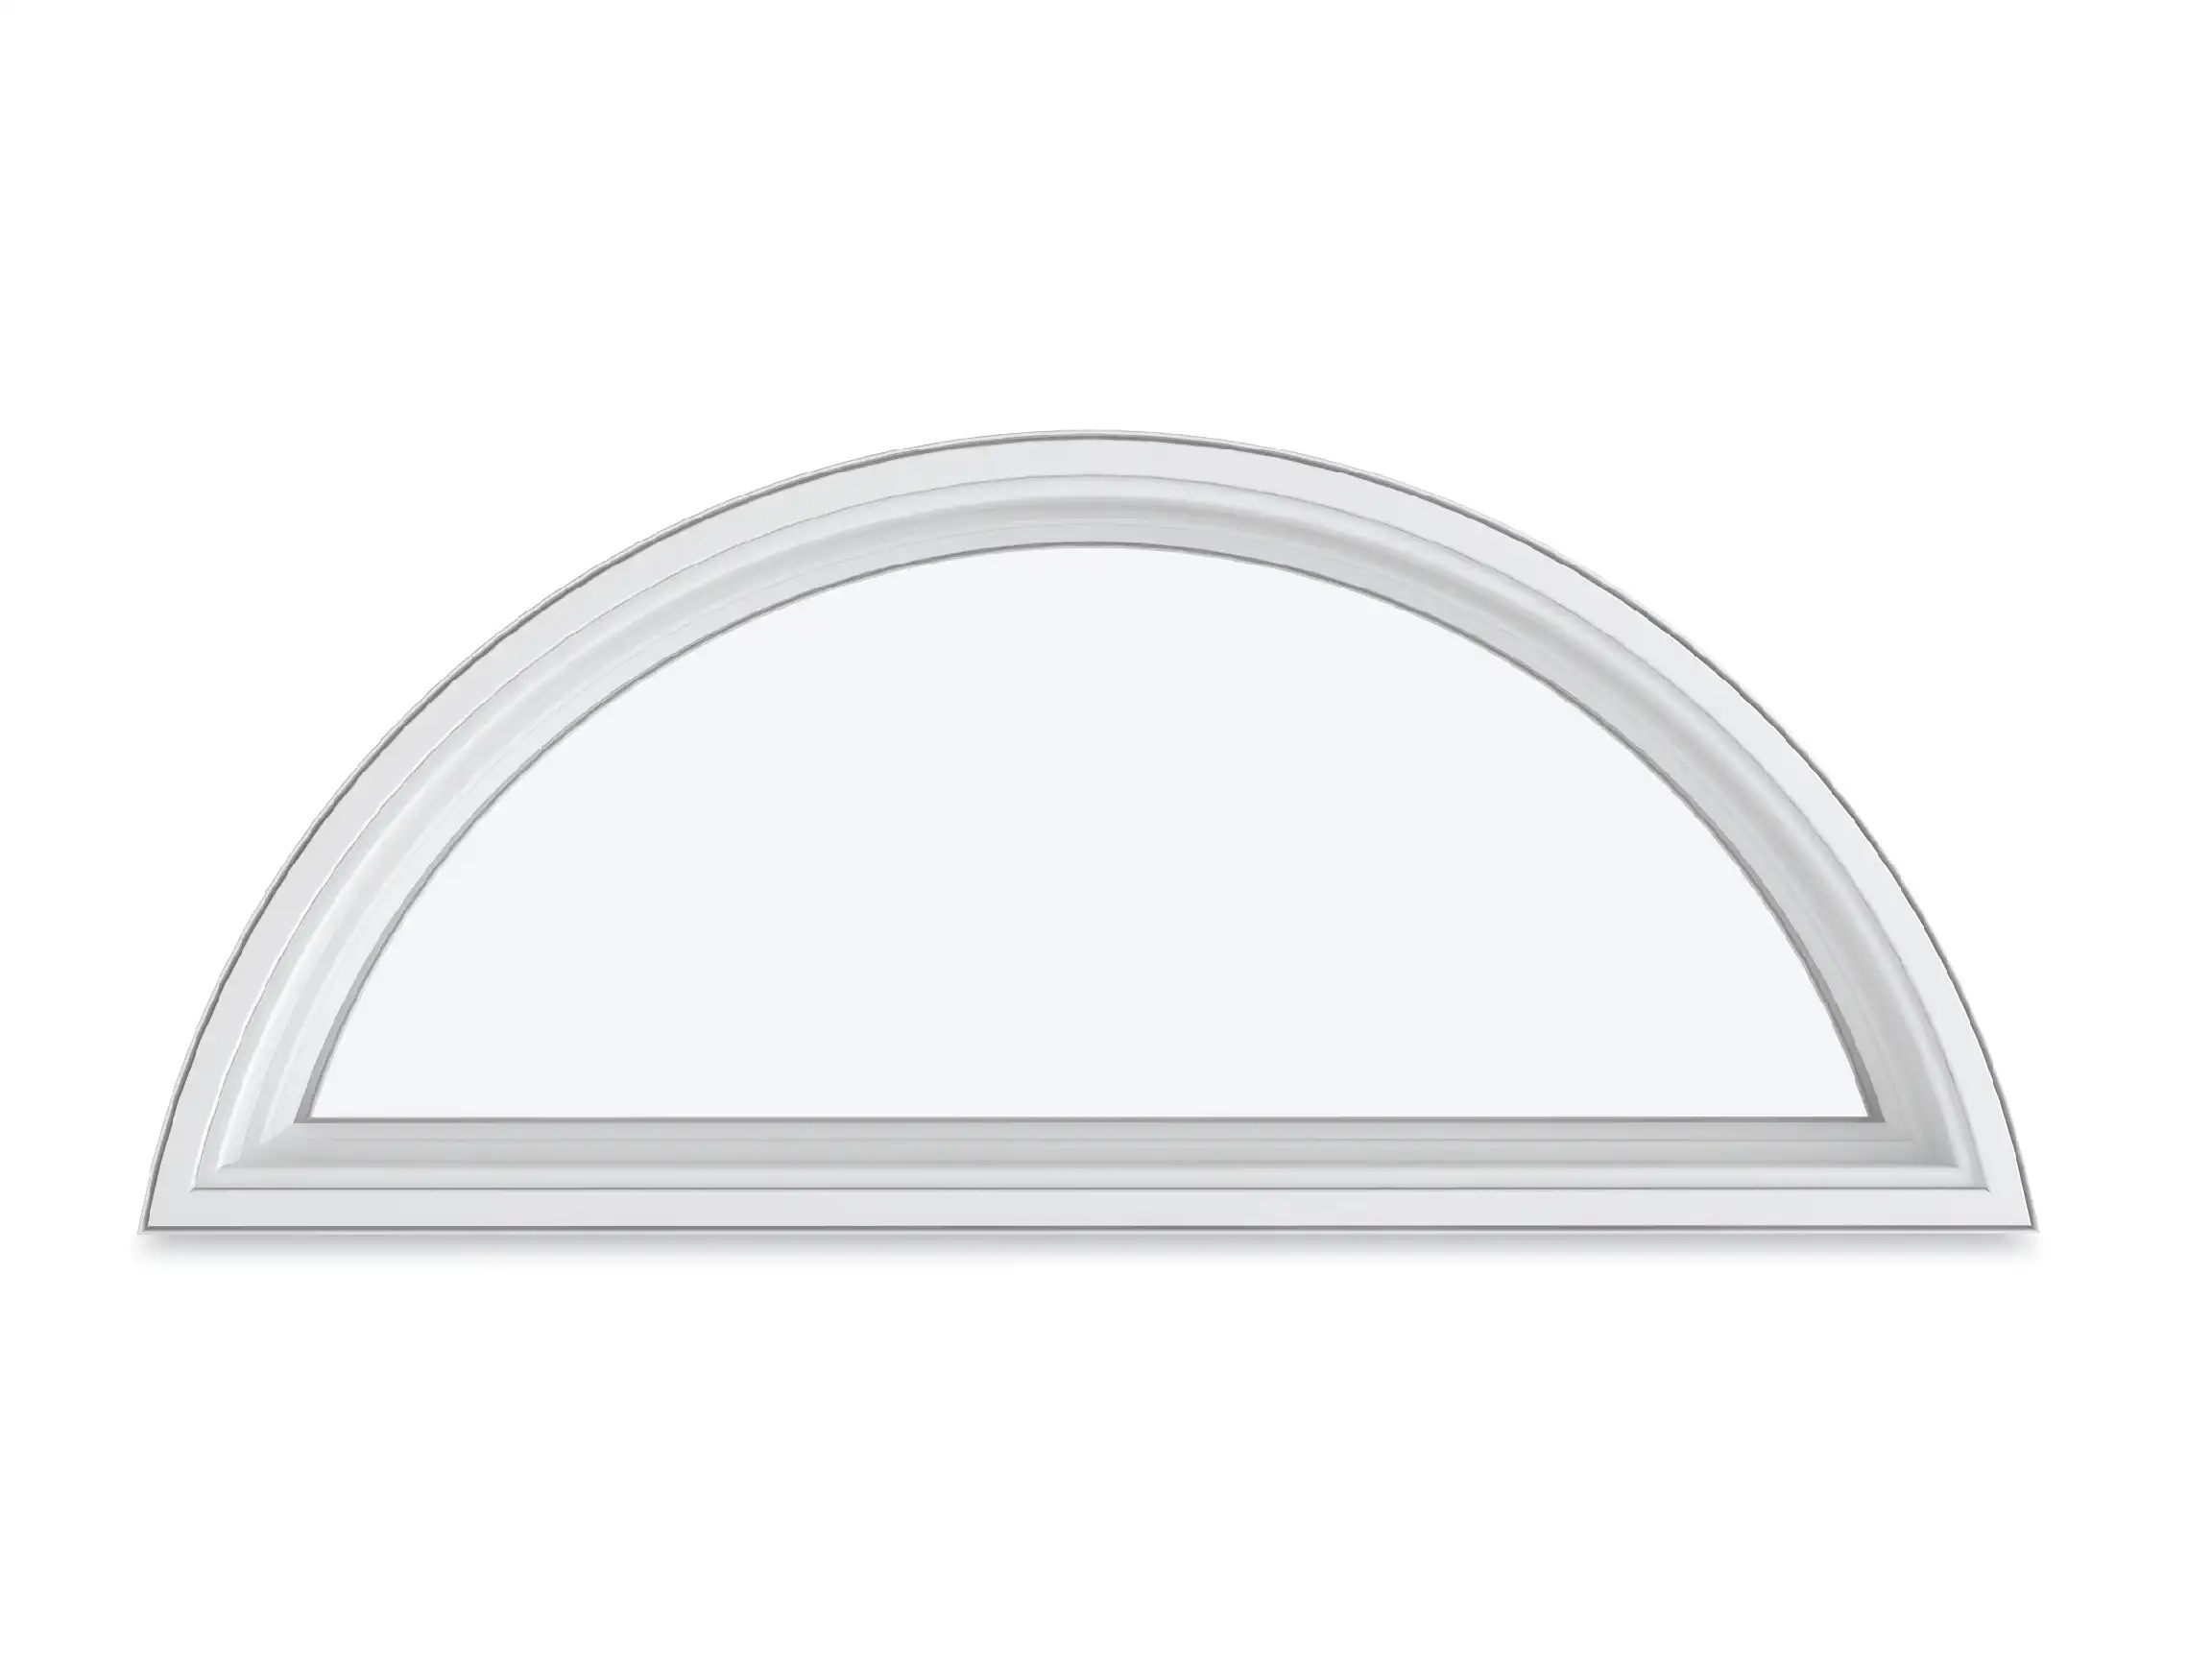 Image of a white Marvin Replacement Round Top window in an Eyebrow style.